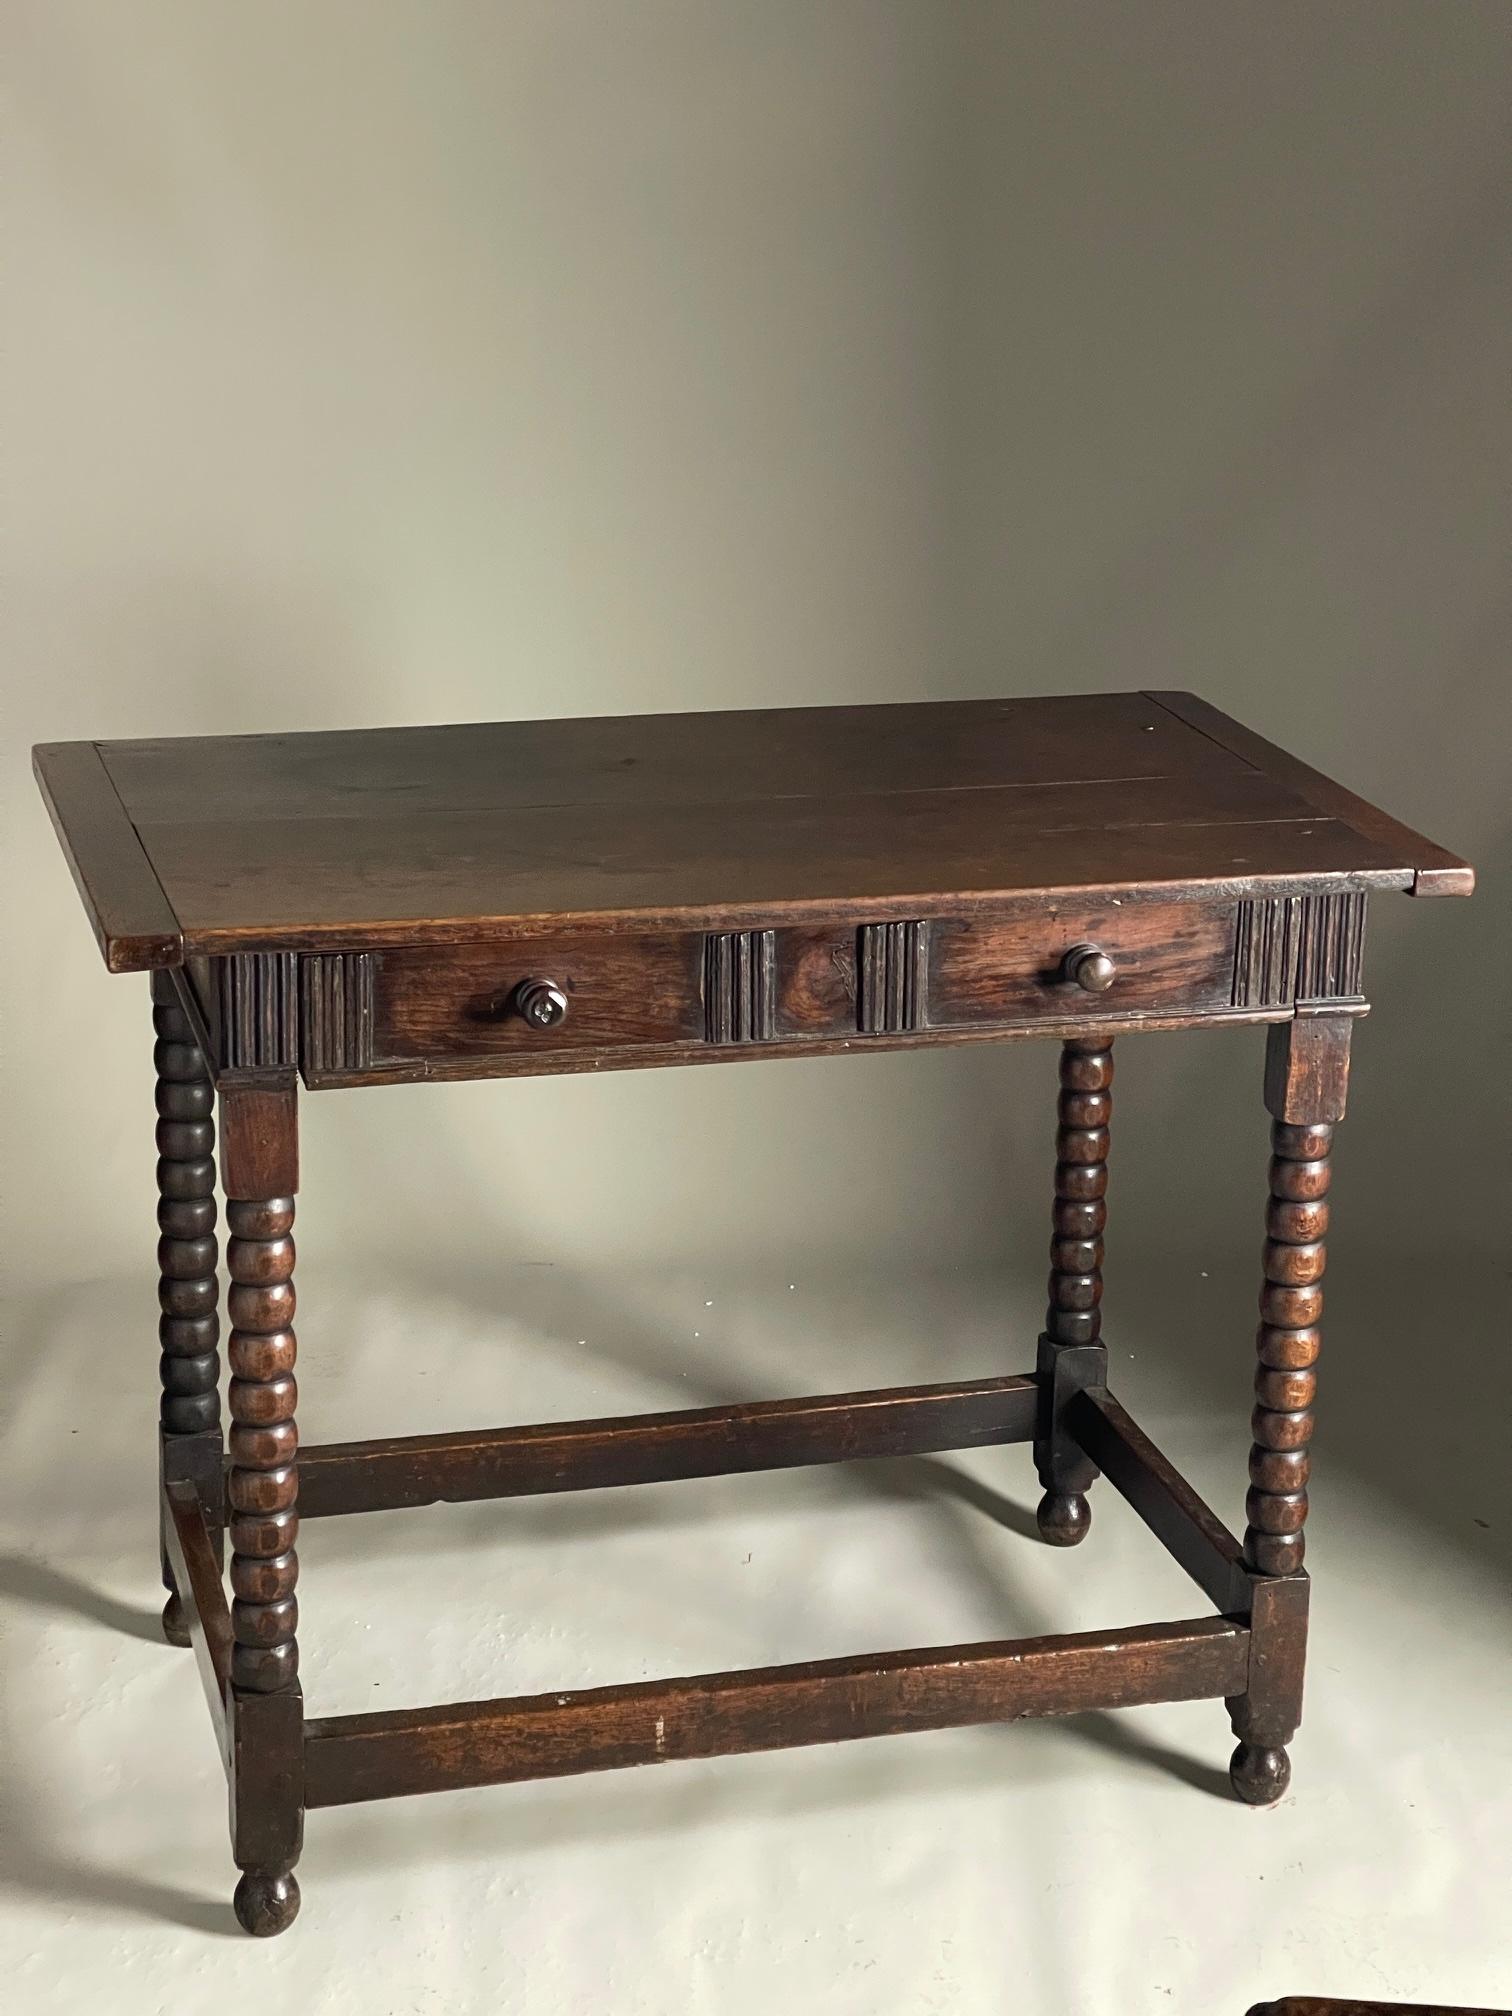 Late 17th Century Oak Side Table with Drawer, nice well turned legs and original wood nobs. Good 2 plank cleated top.

size 98 cms long 56 deep 78 high